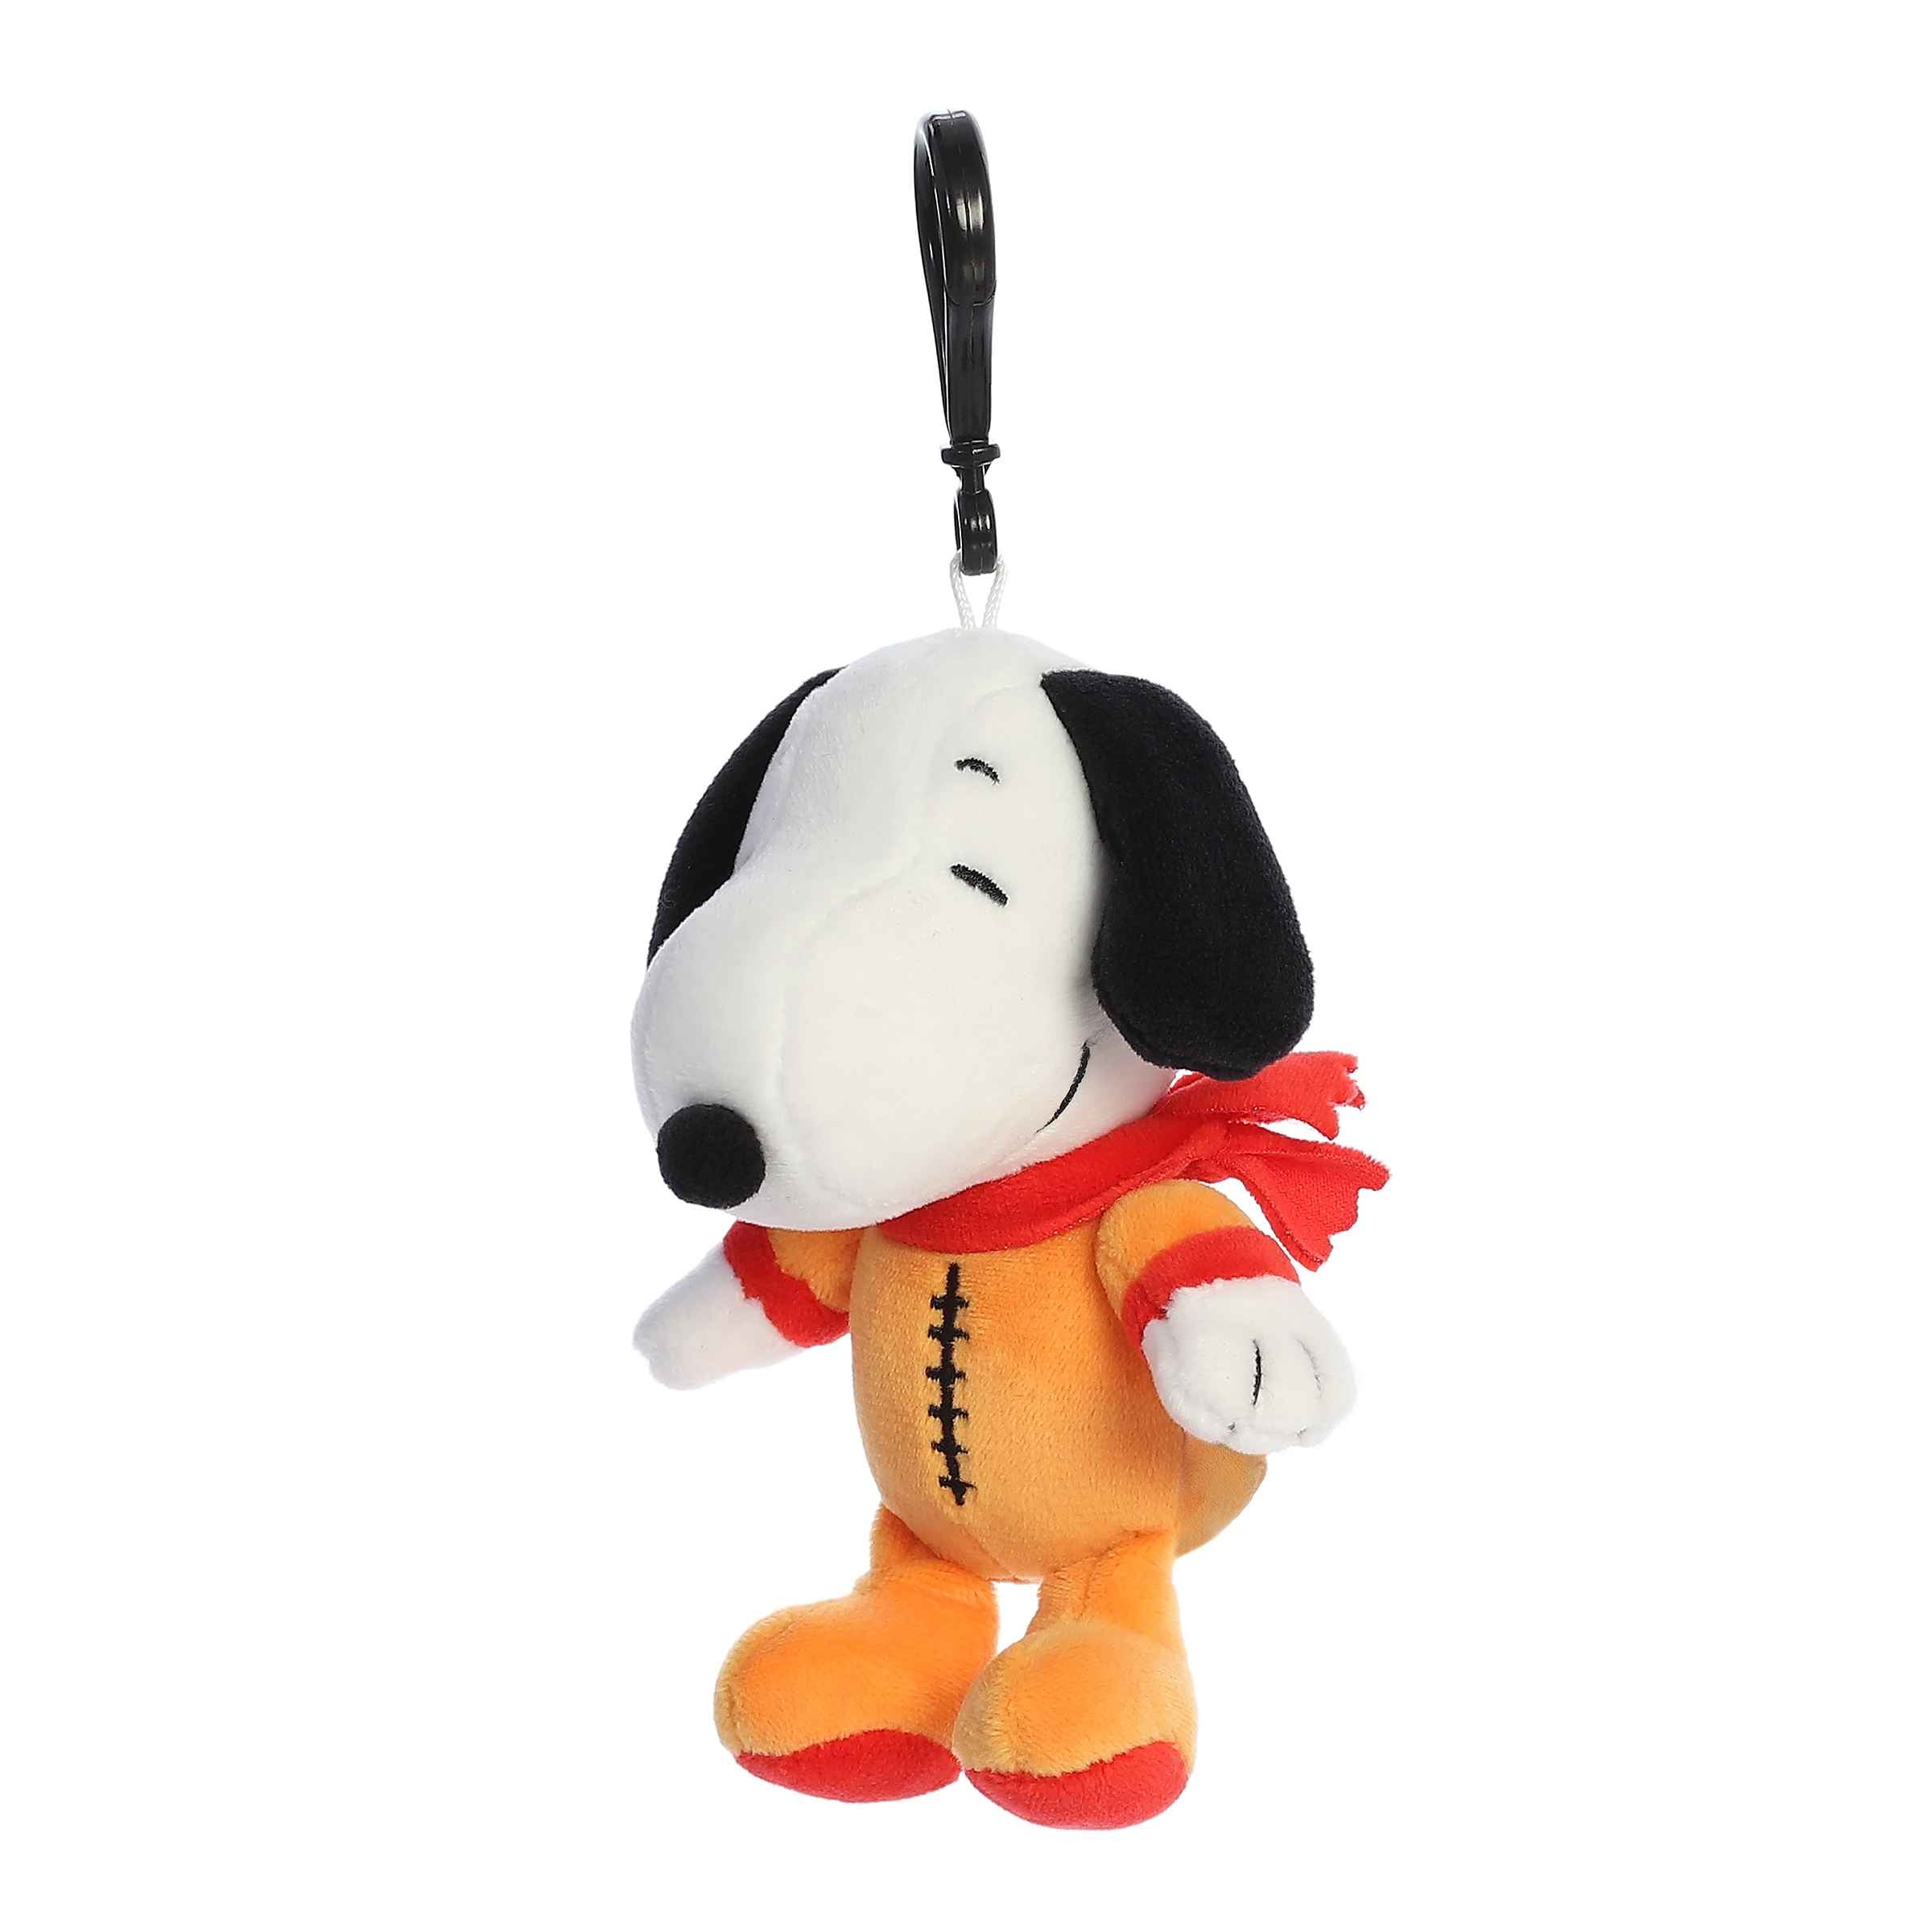 Astronaut Snoopy keychain from Peanuts by Aurora in an orange suit, durable and delightful, for space fans